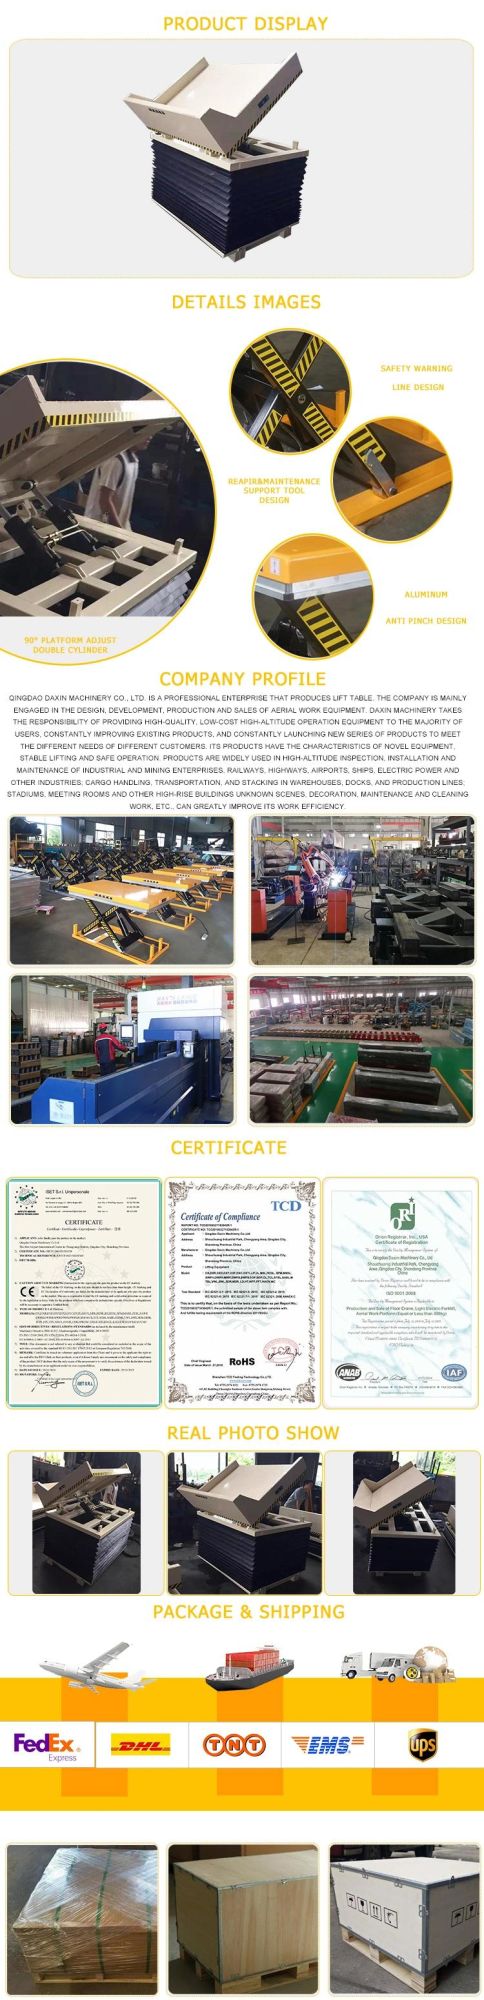 CE Approved High Quality Hydraulic Standard Single Scissor Lift Table